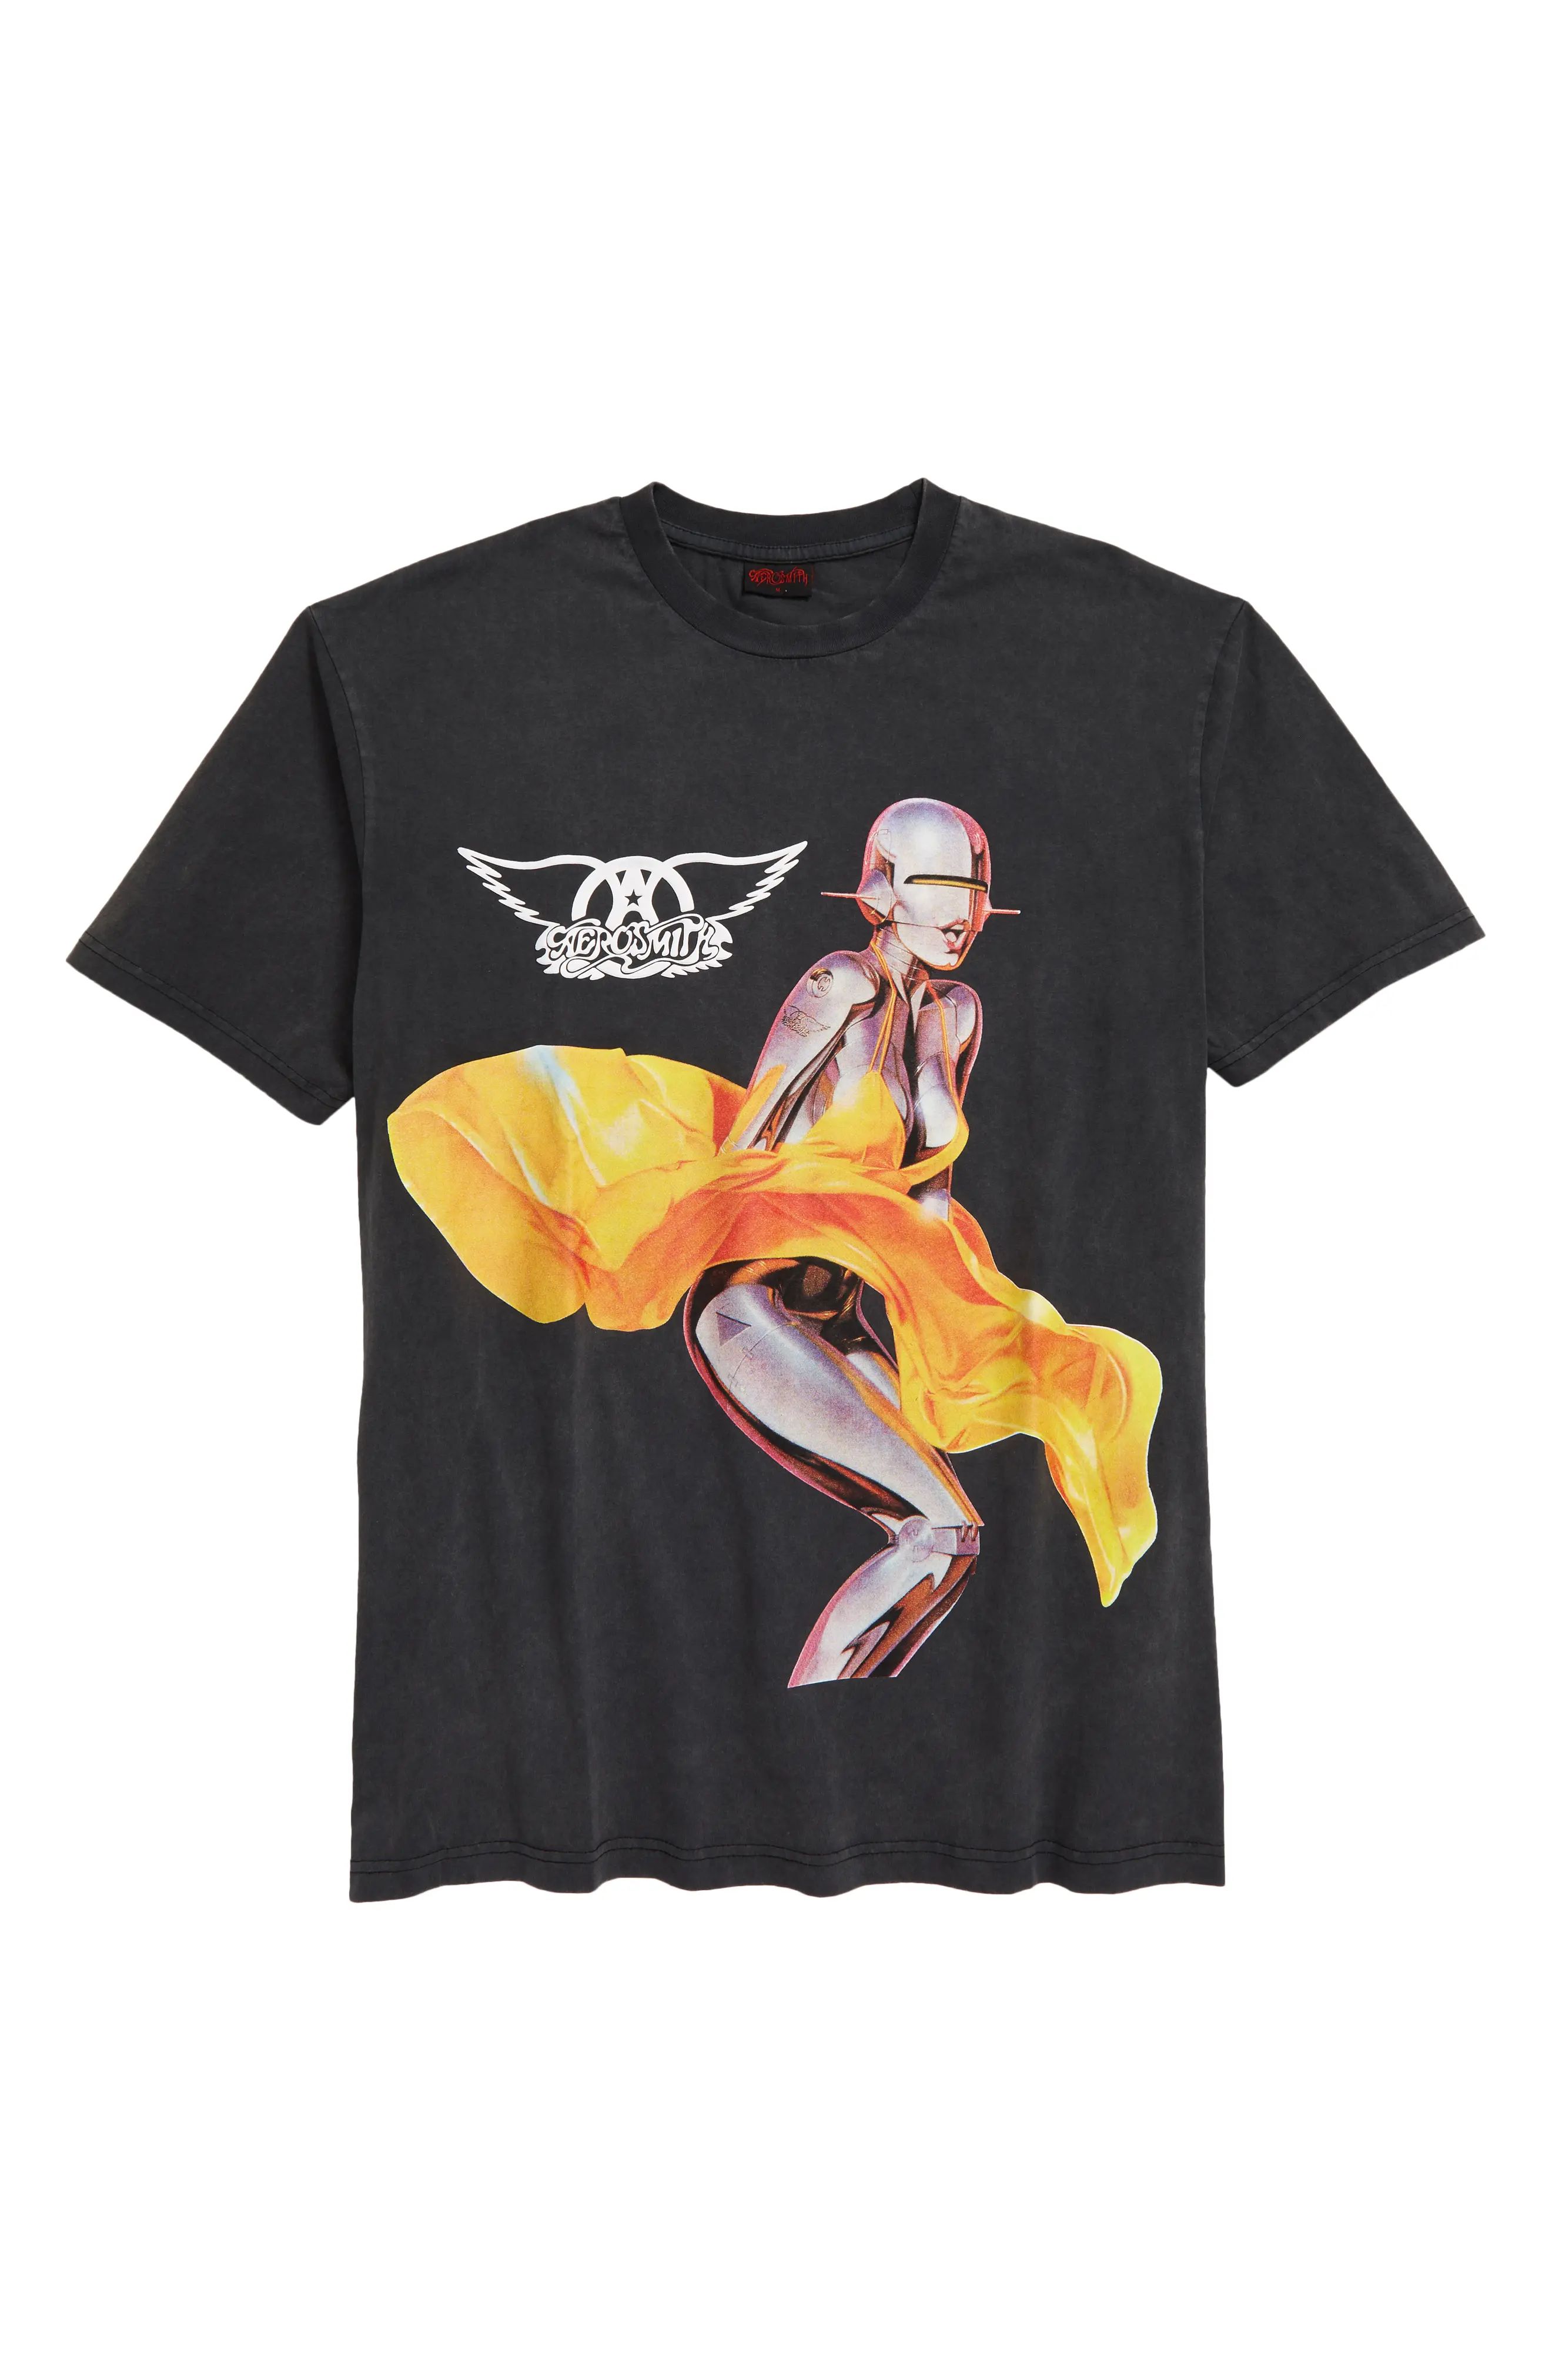 Topman Men's Aerosmith Graphic Tee in Washed Black at Nordstrom, Size X-Small | Nordstrom